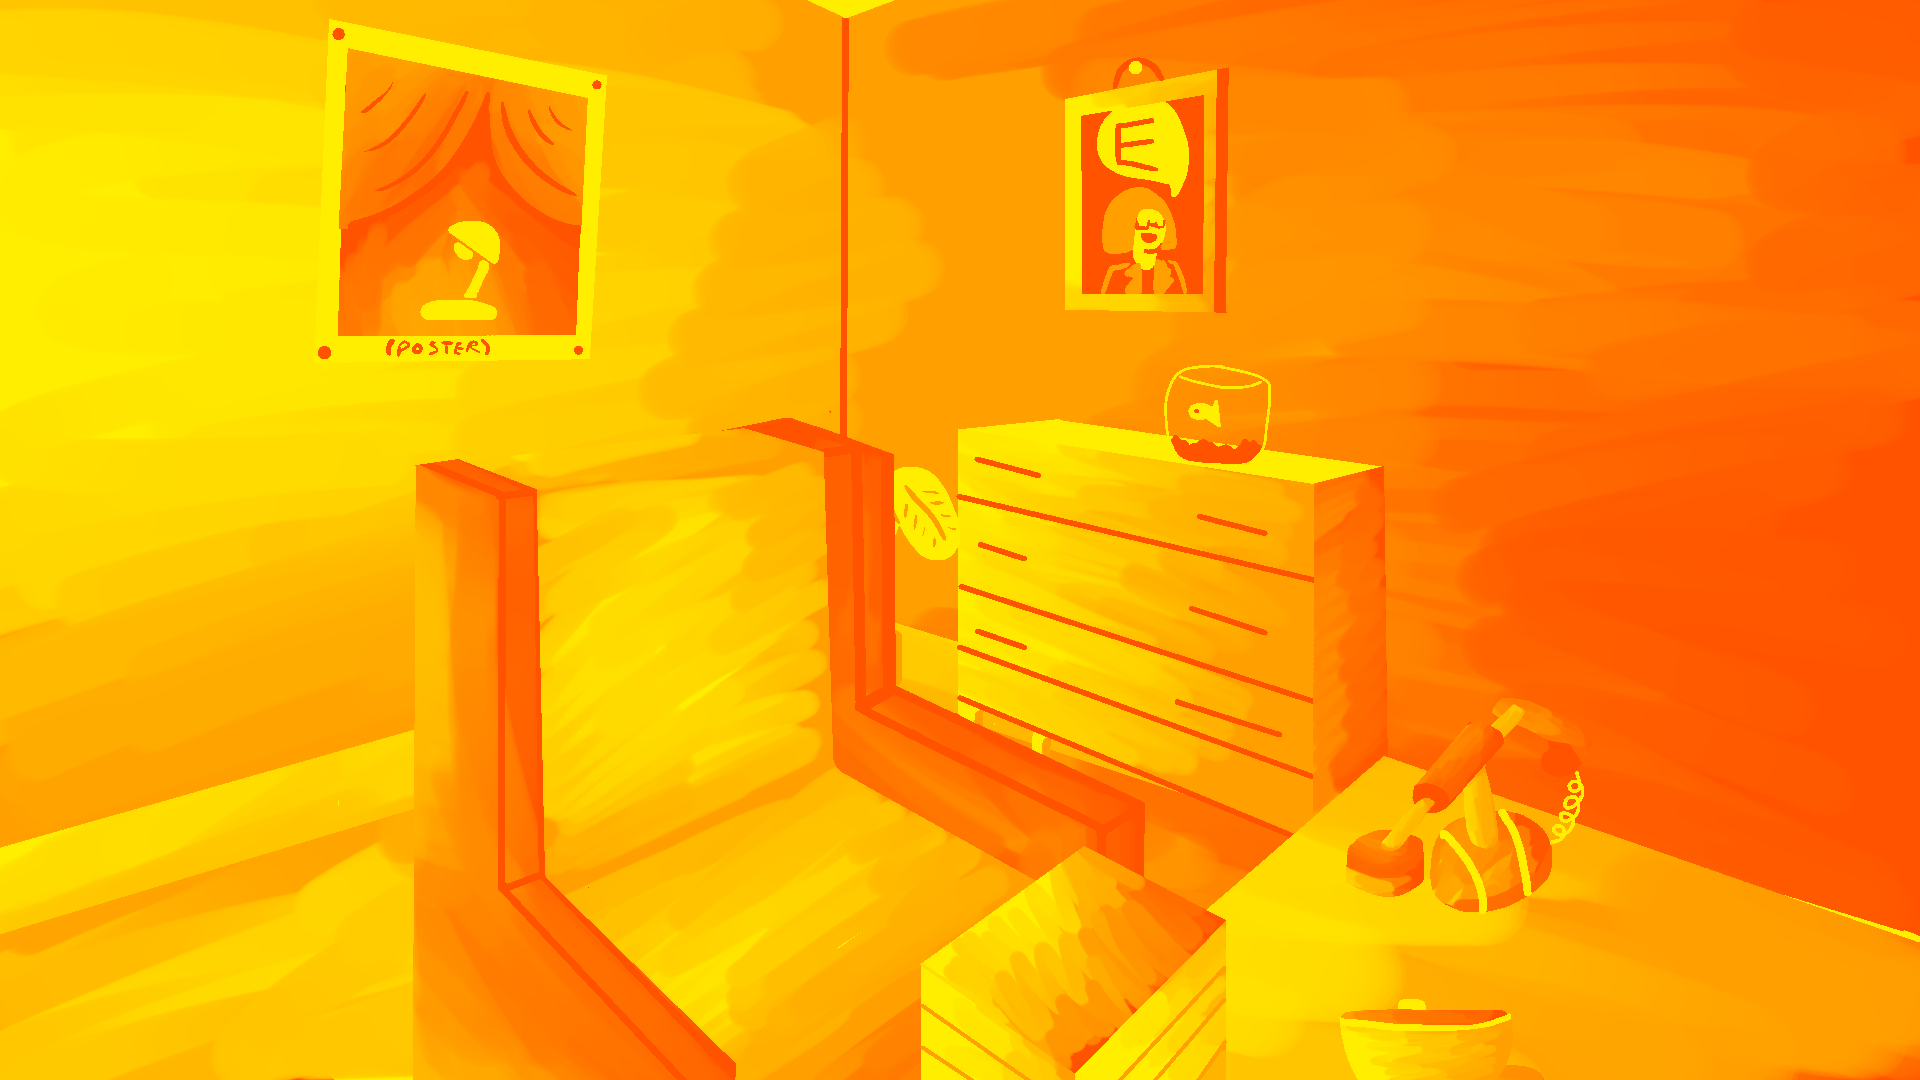 Illustration of an office in shades of orange.